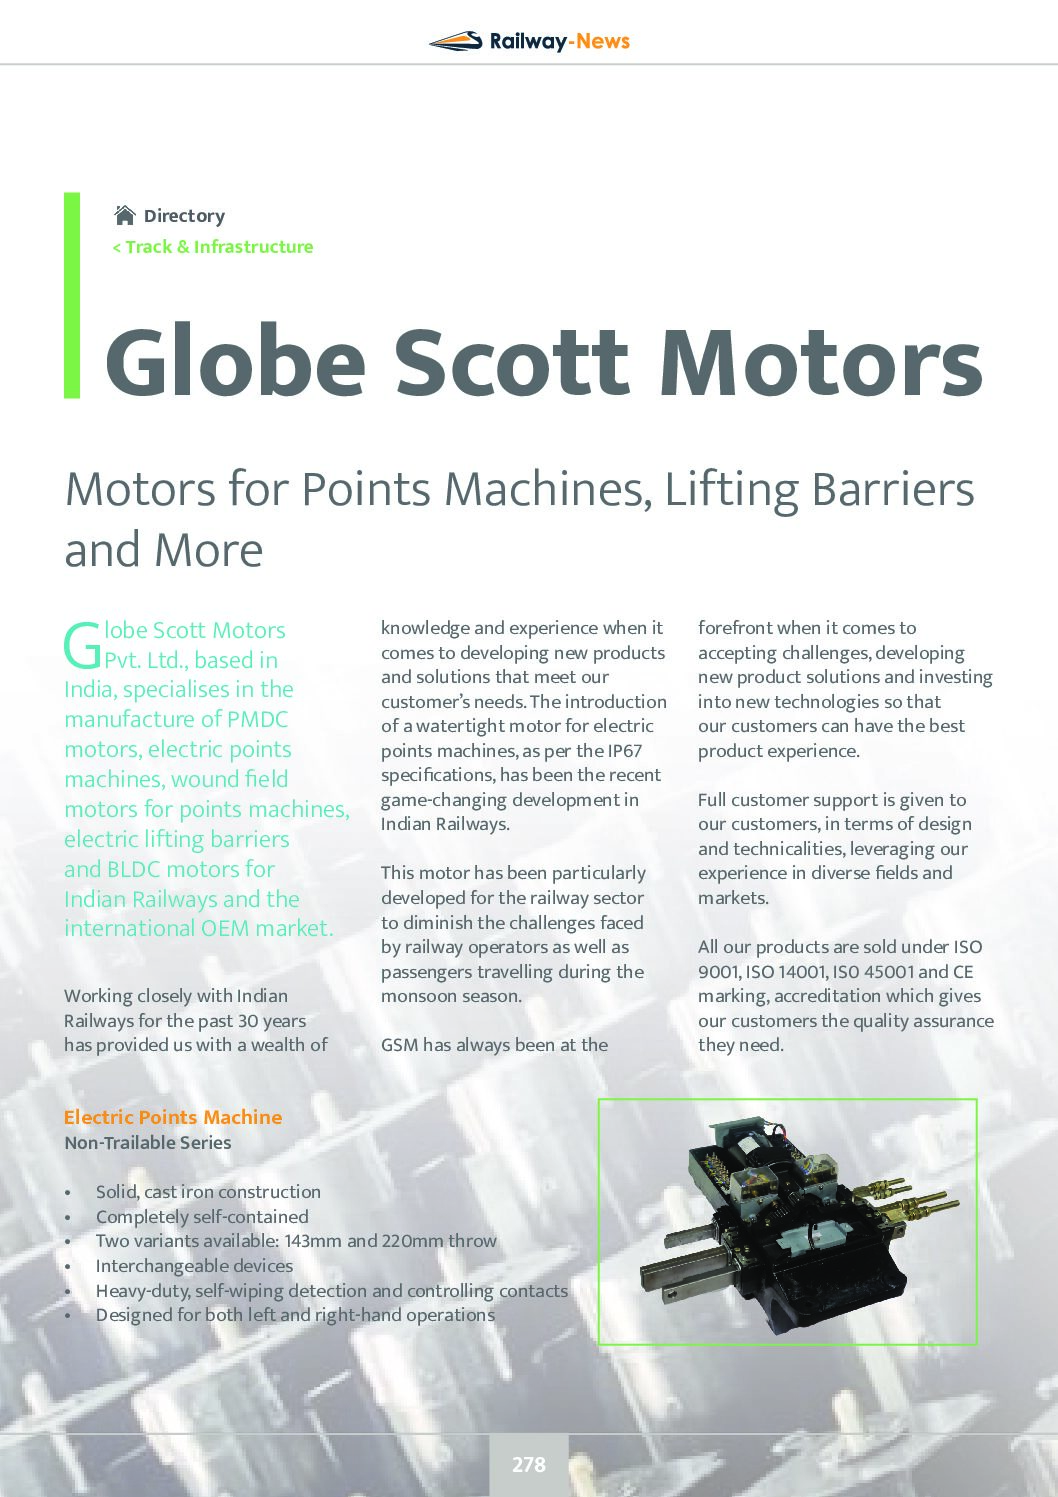 Motors for Points Machines, Lifting Barriers and More